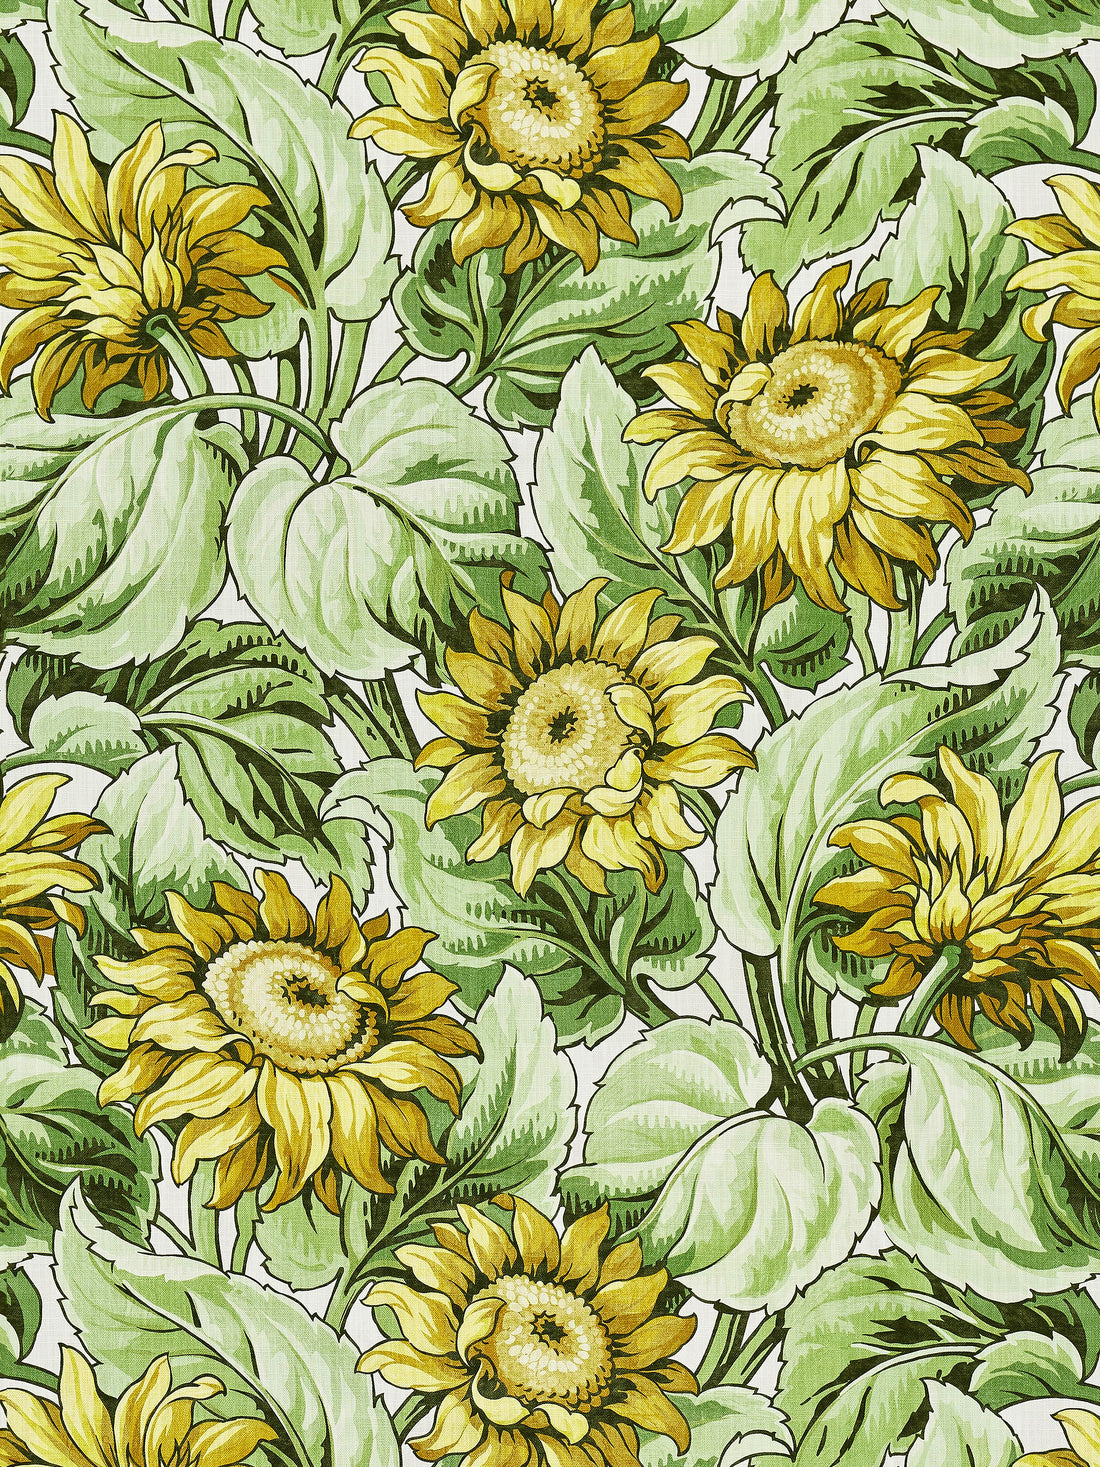 Sunflower Print fabric in harvest color - pattern number GW 000116631 - by Scalamandre in the Grey Watkins collection